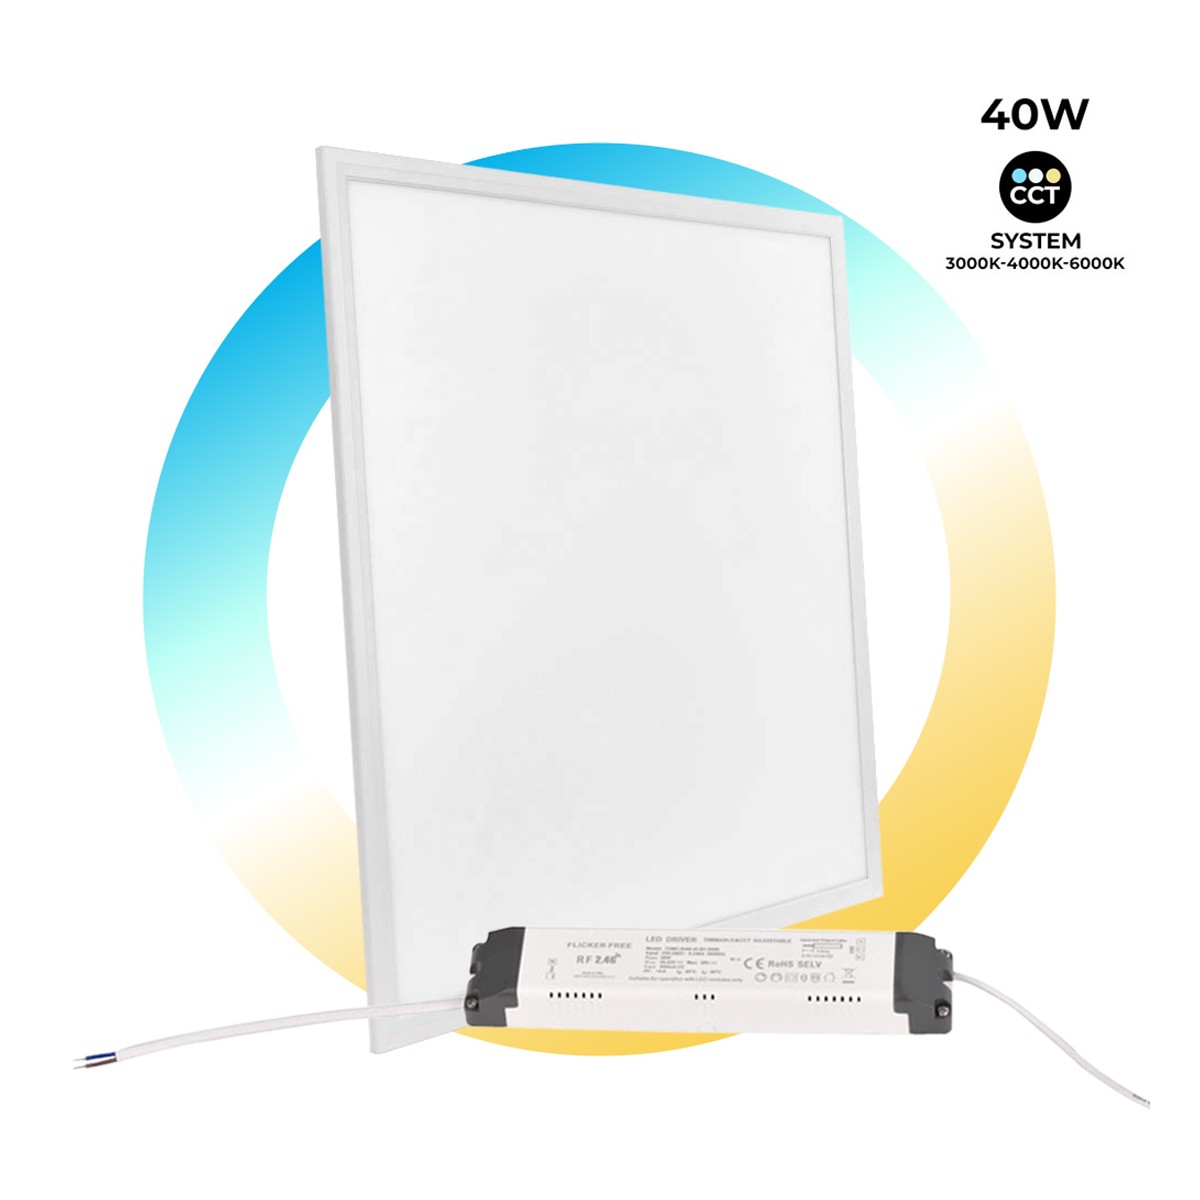 slim panel - - 40W CCT LED cm Dimmable 60x60